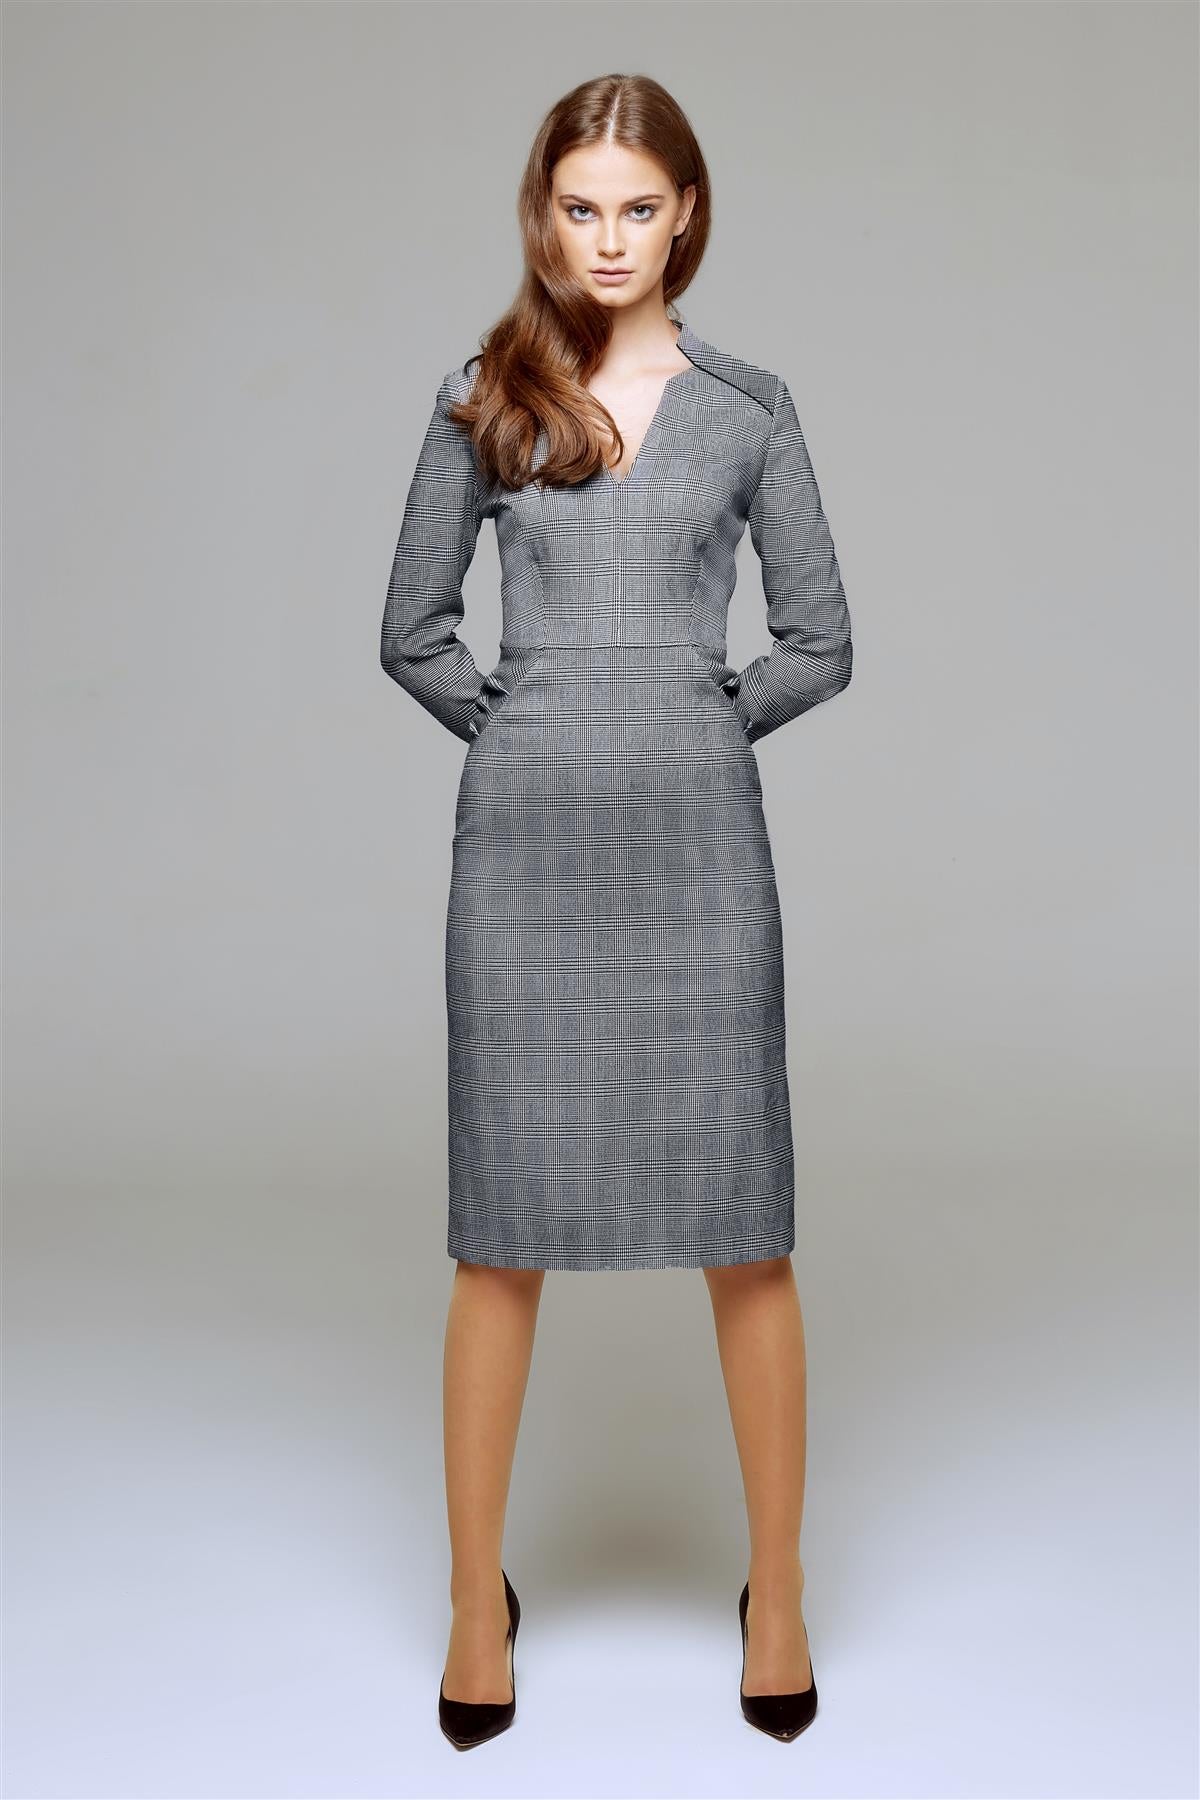 Prince of Wales Checked Dress